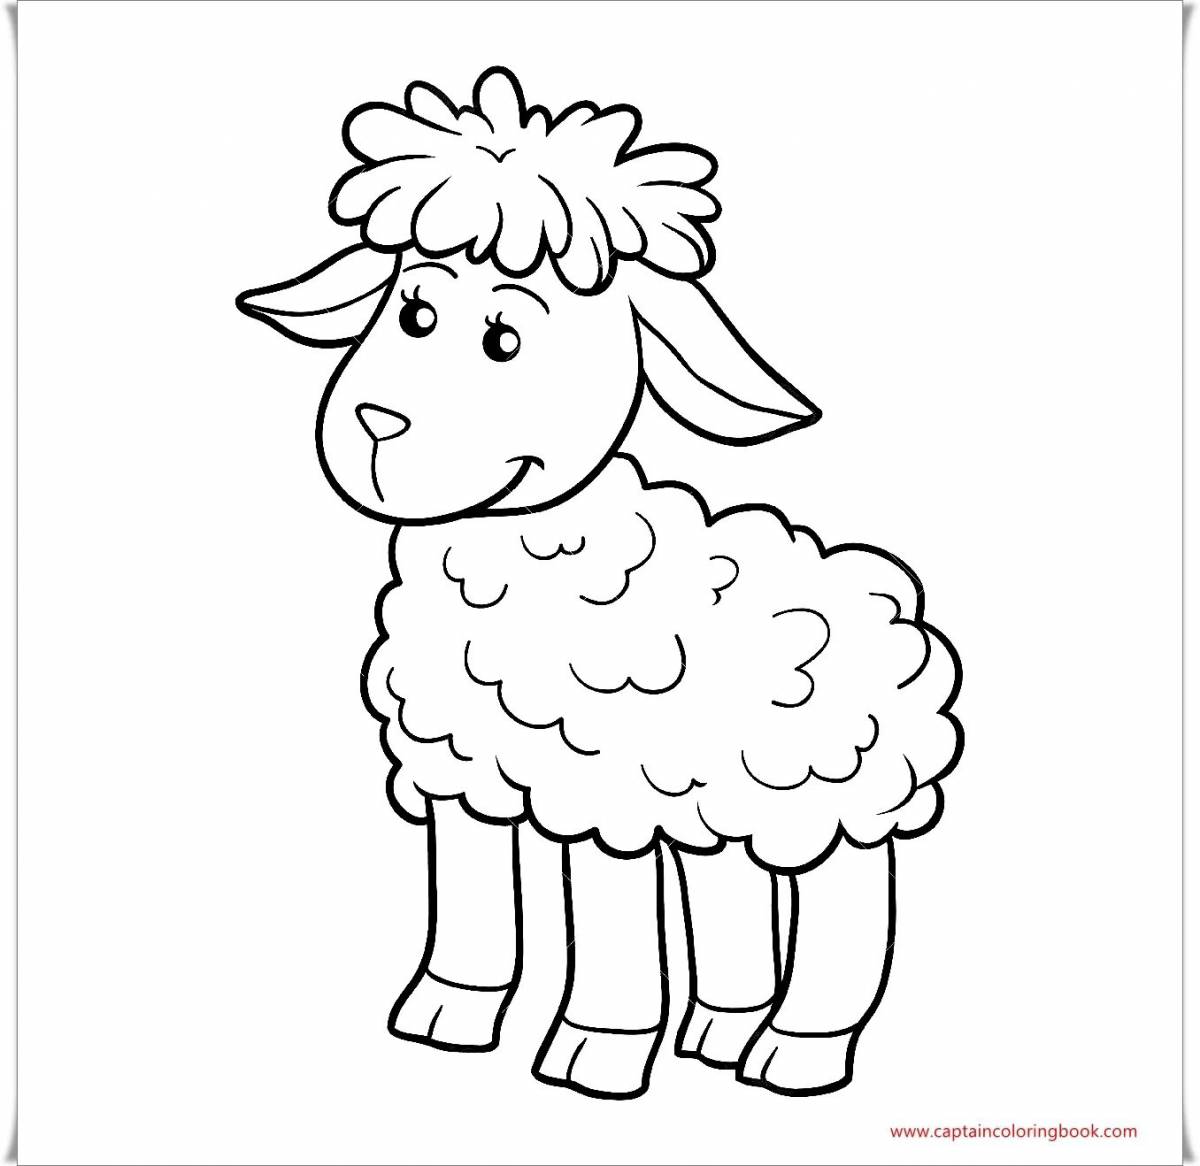 Colorful and funny sheep coloring book for children 5-6 years old